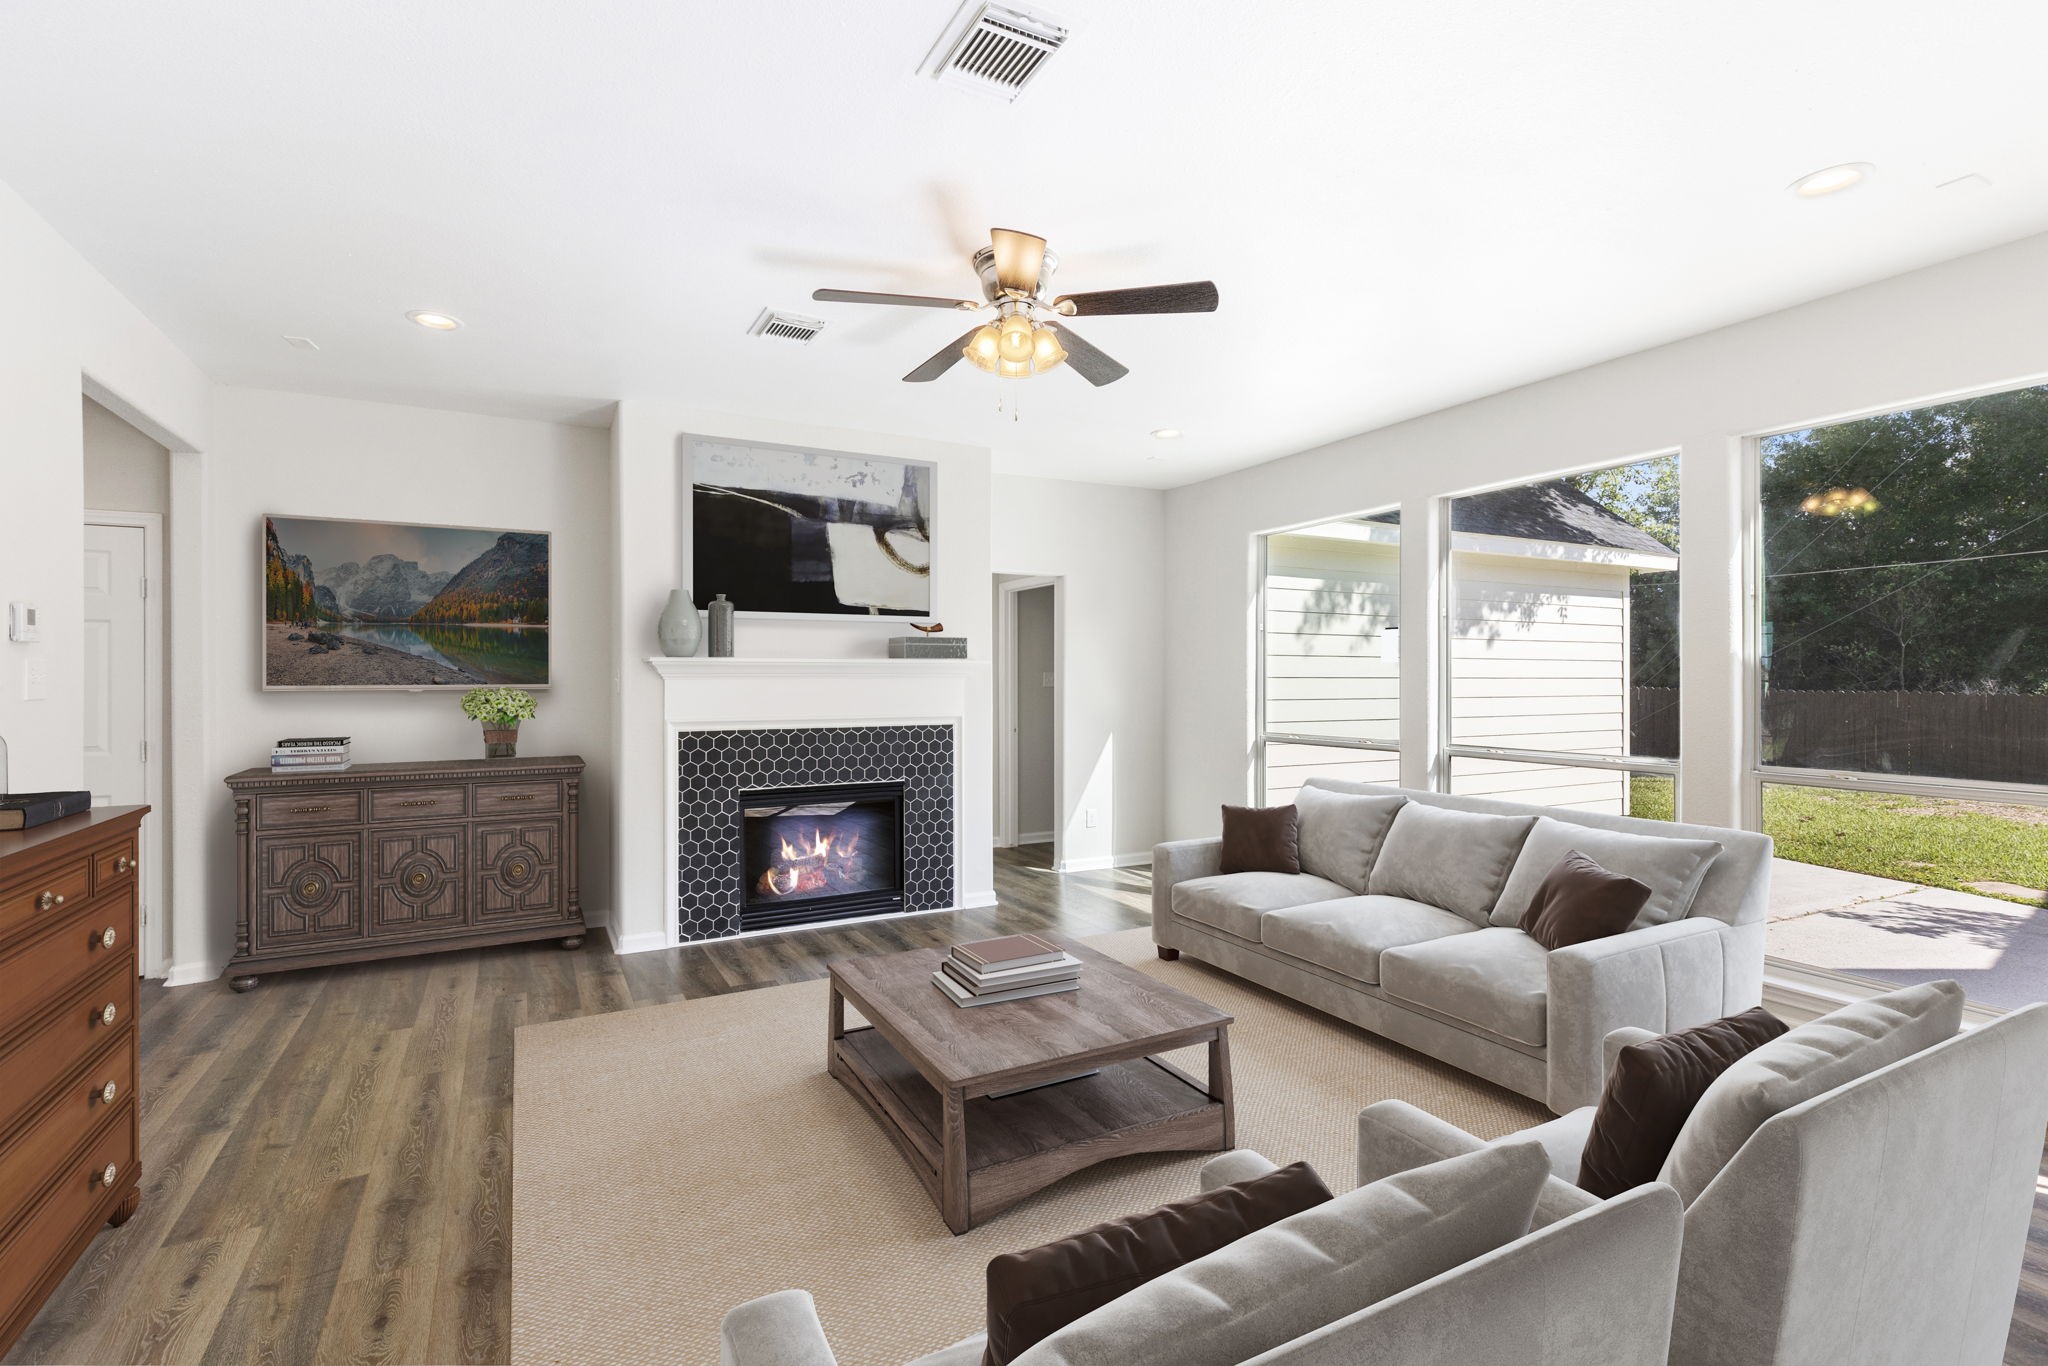 This home has a spacious family room with a wall of windows to the backyard allowing tons of natural light to pour into the home.   Enjoy the gas log fireplace with contemporary tile backsplash and wood mantle.  **This image has been virtually staged